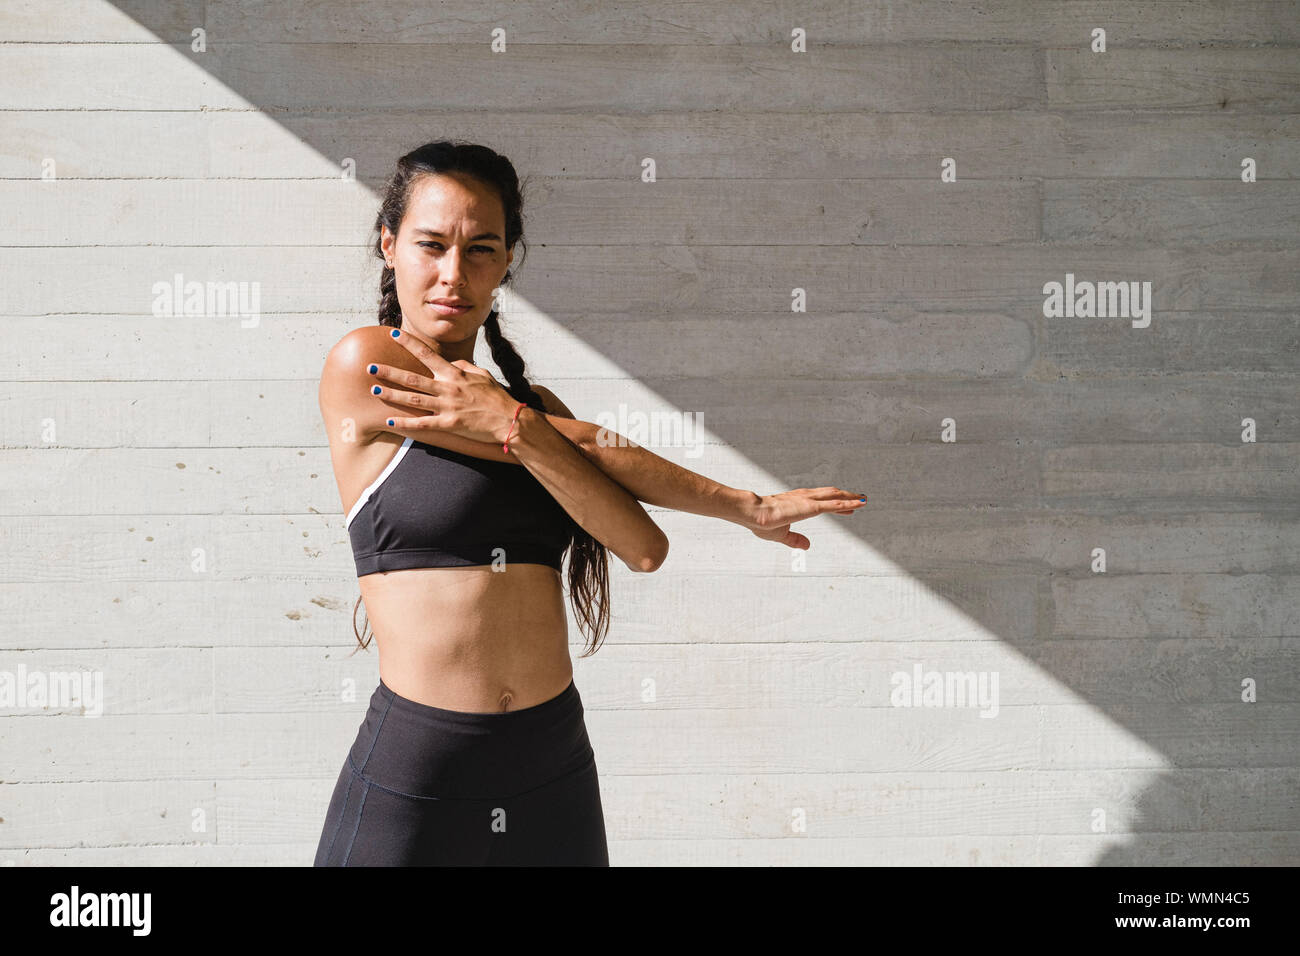 Upper body of female athlete stretching arms Stock Photo